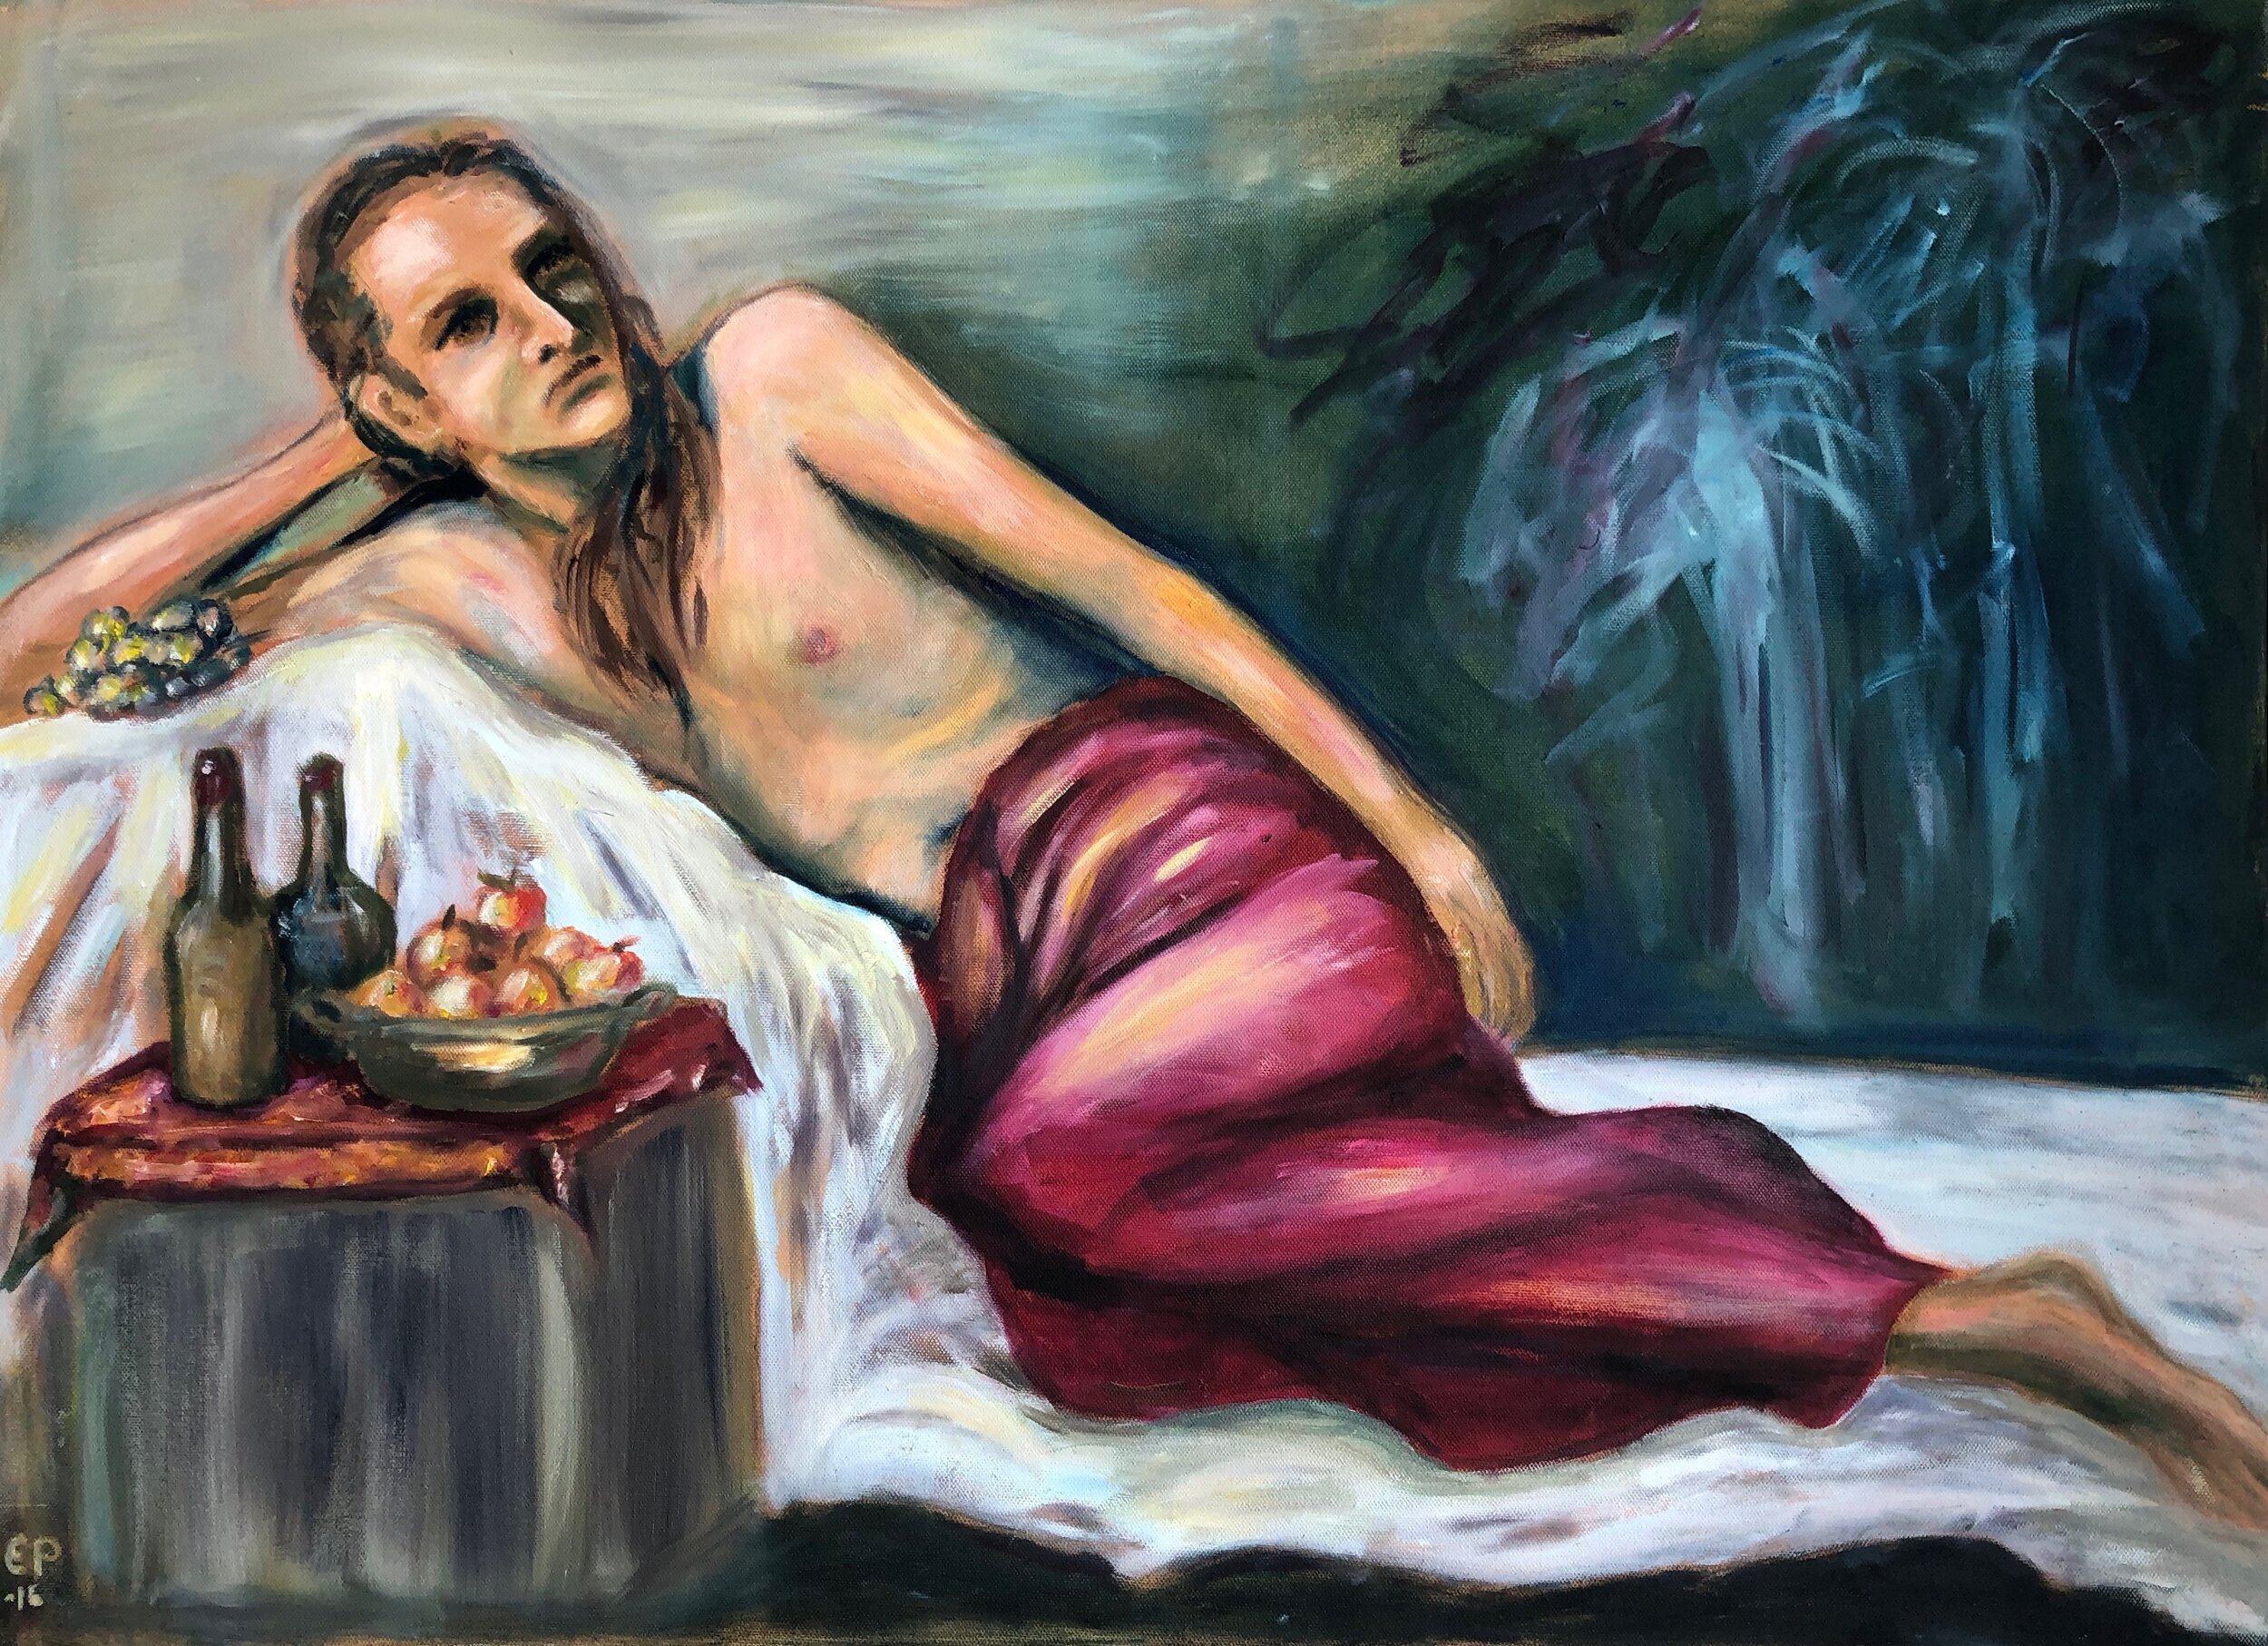  BACCHUS, 2016, acrylic and oil on canvas, 65x90cm 